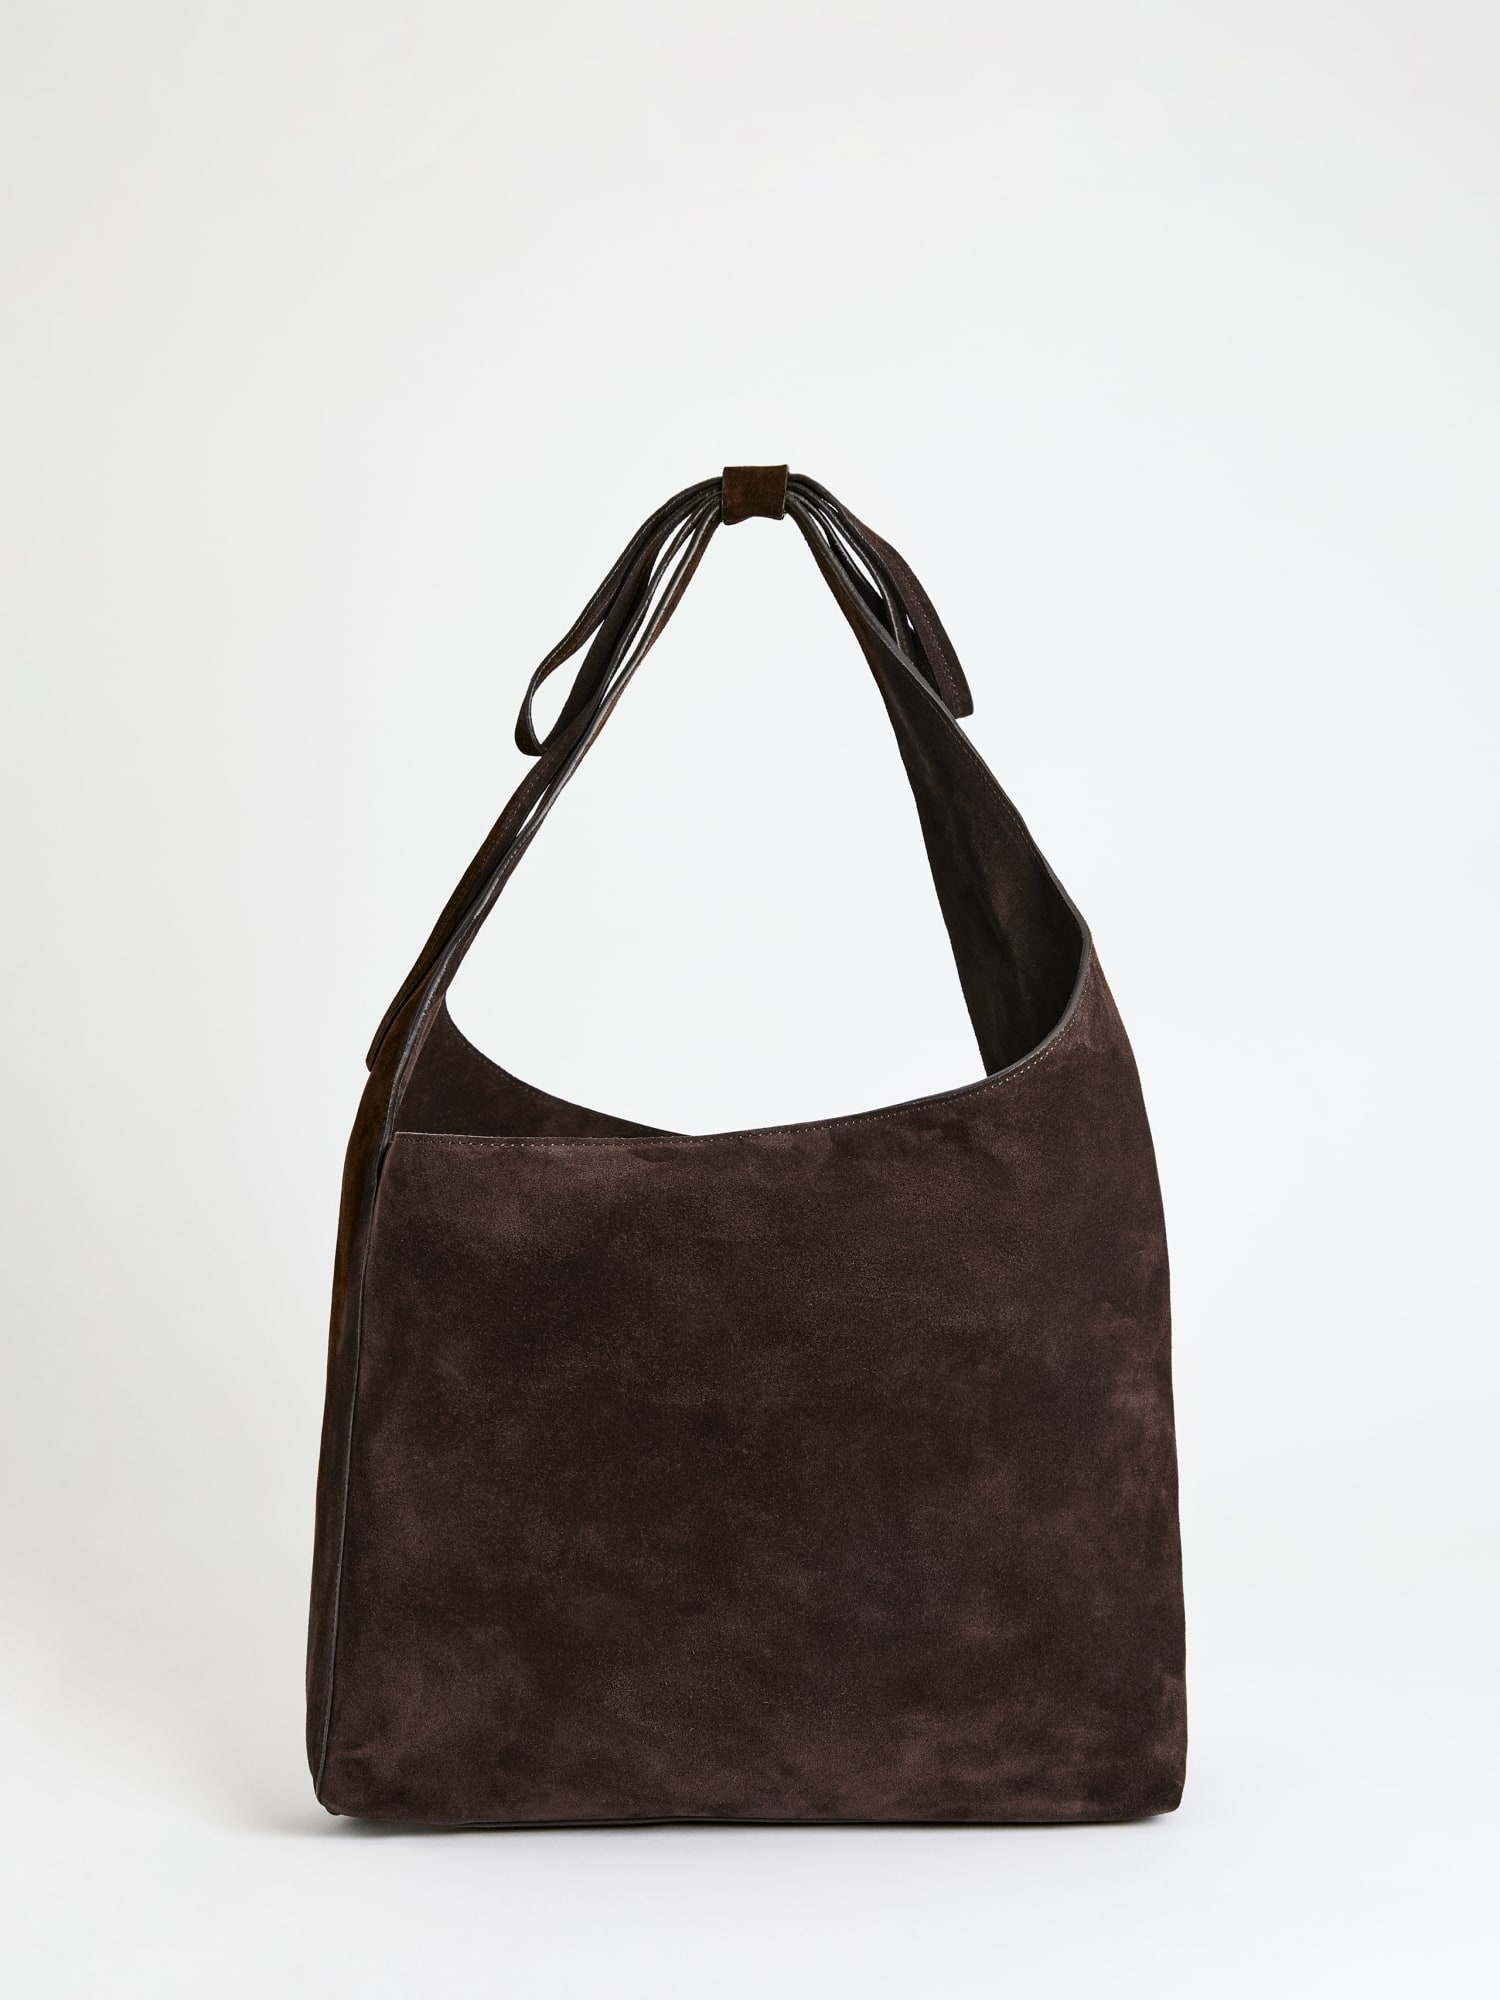 Reformation Vittoria East-West Tote